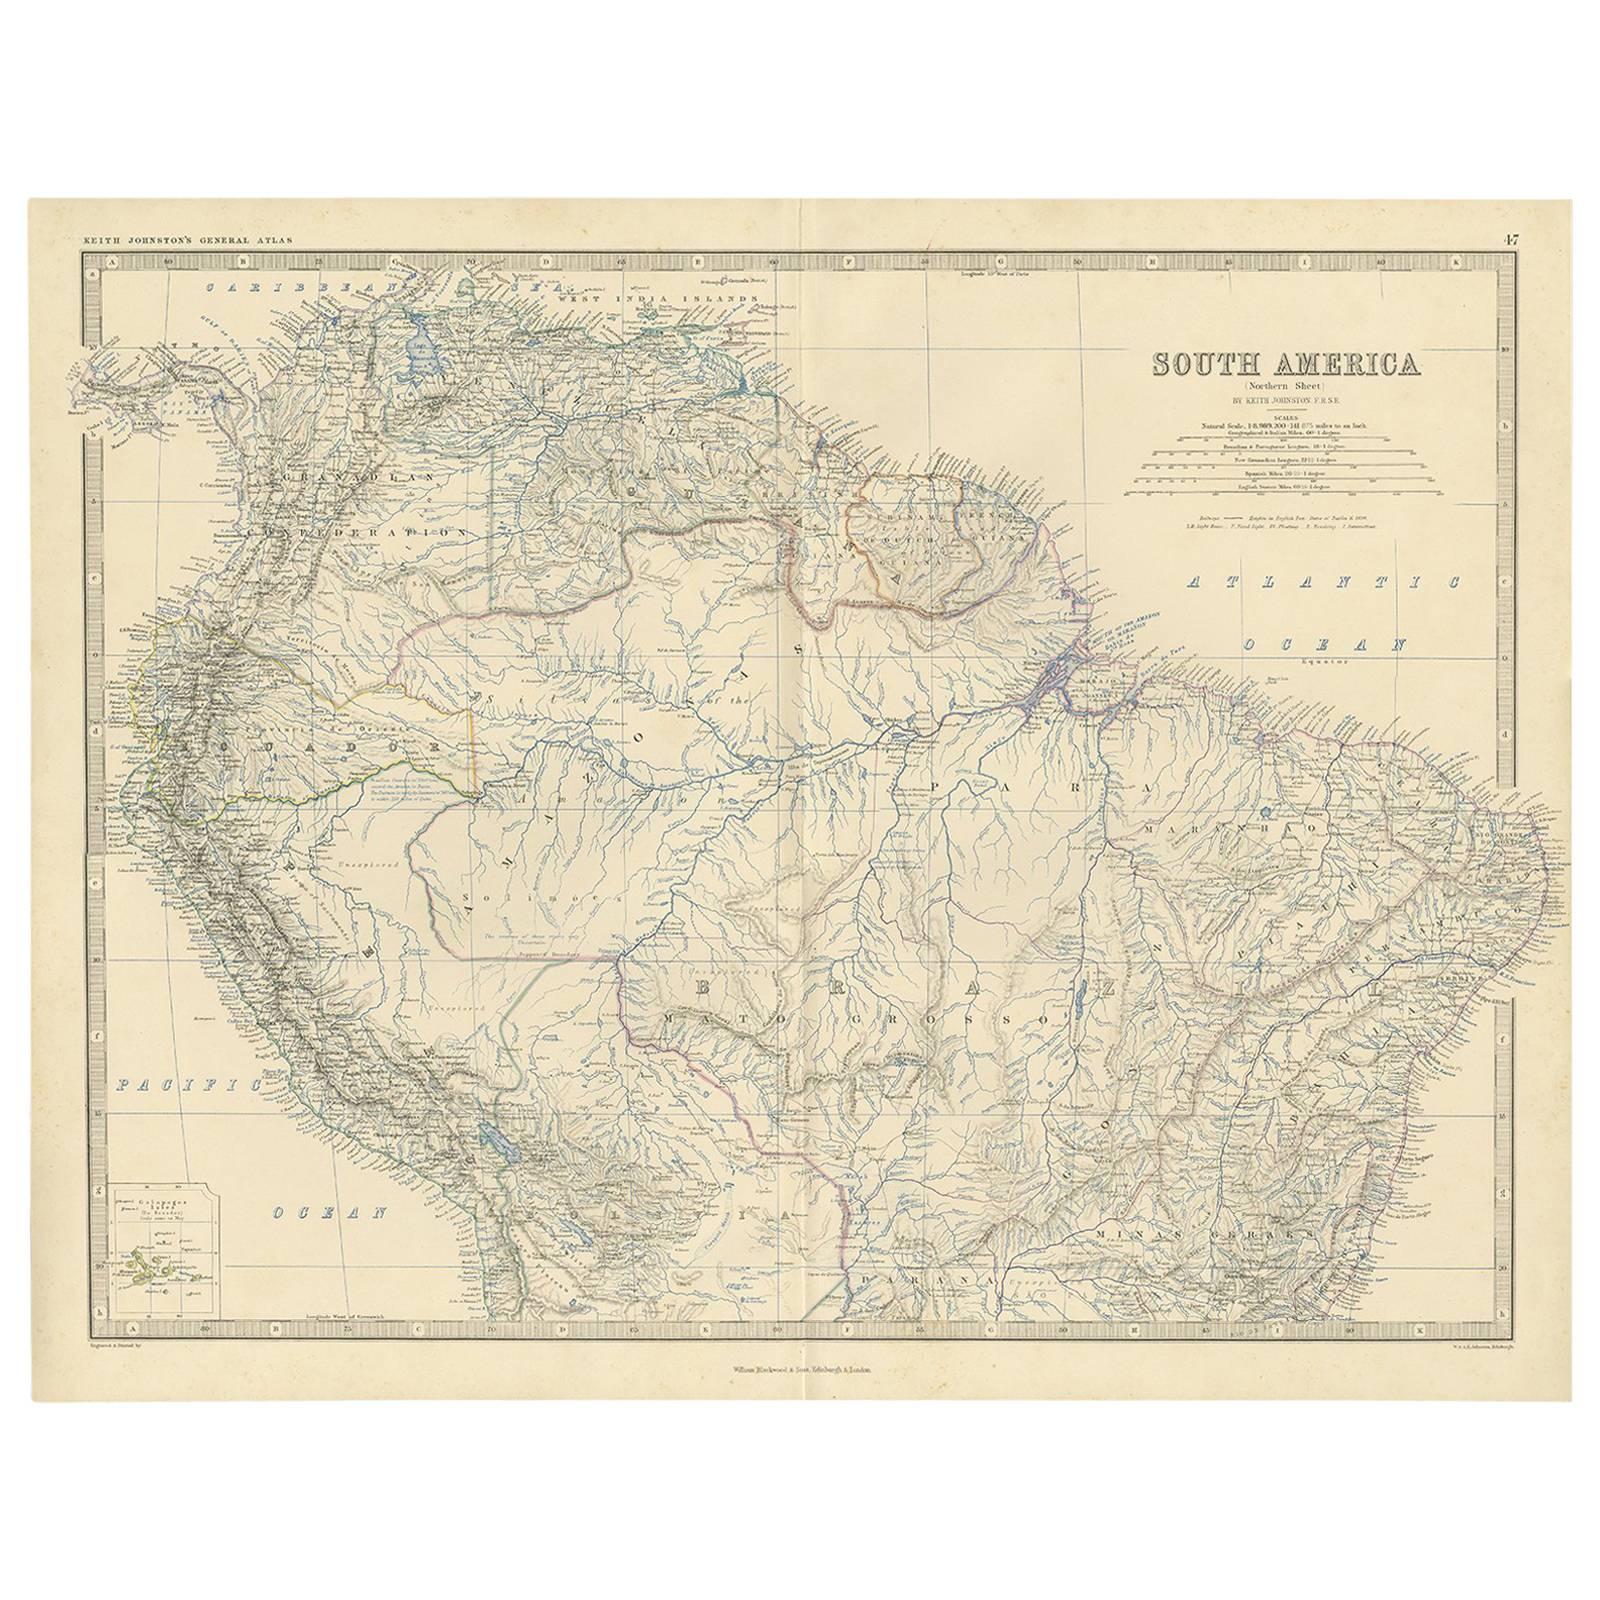 Antique Map of South America ‘North’ by A.K. Johnston, 1865